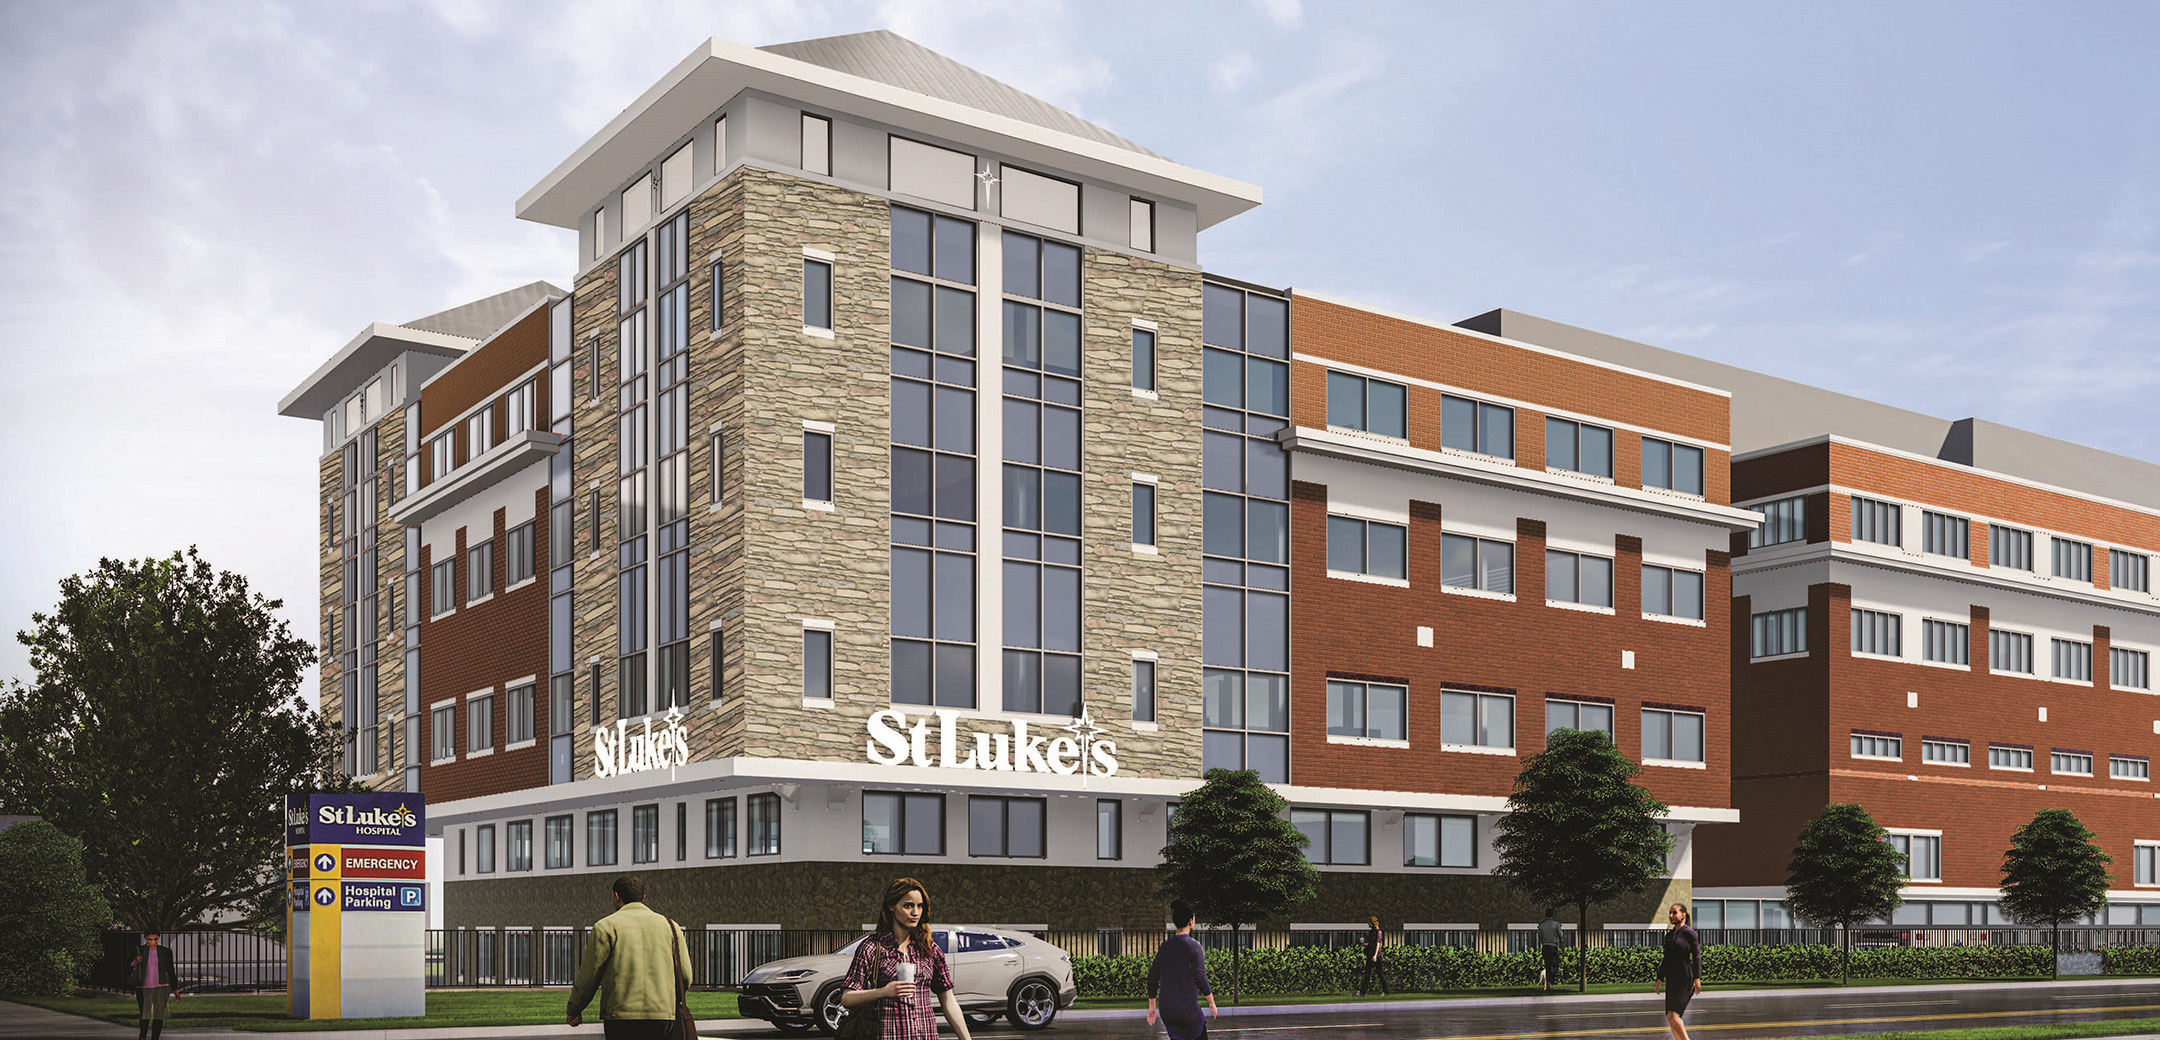 A rendering of St. Luke's University Health Network Mother's and Baby Tower Showcasing the tan and red brick exterior of the facility with windows